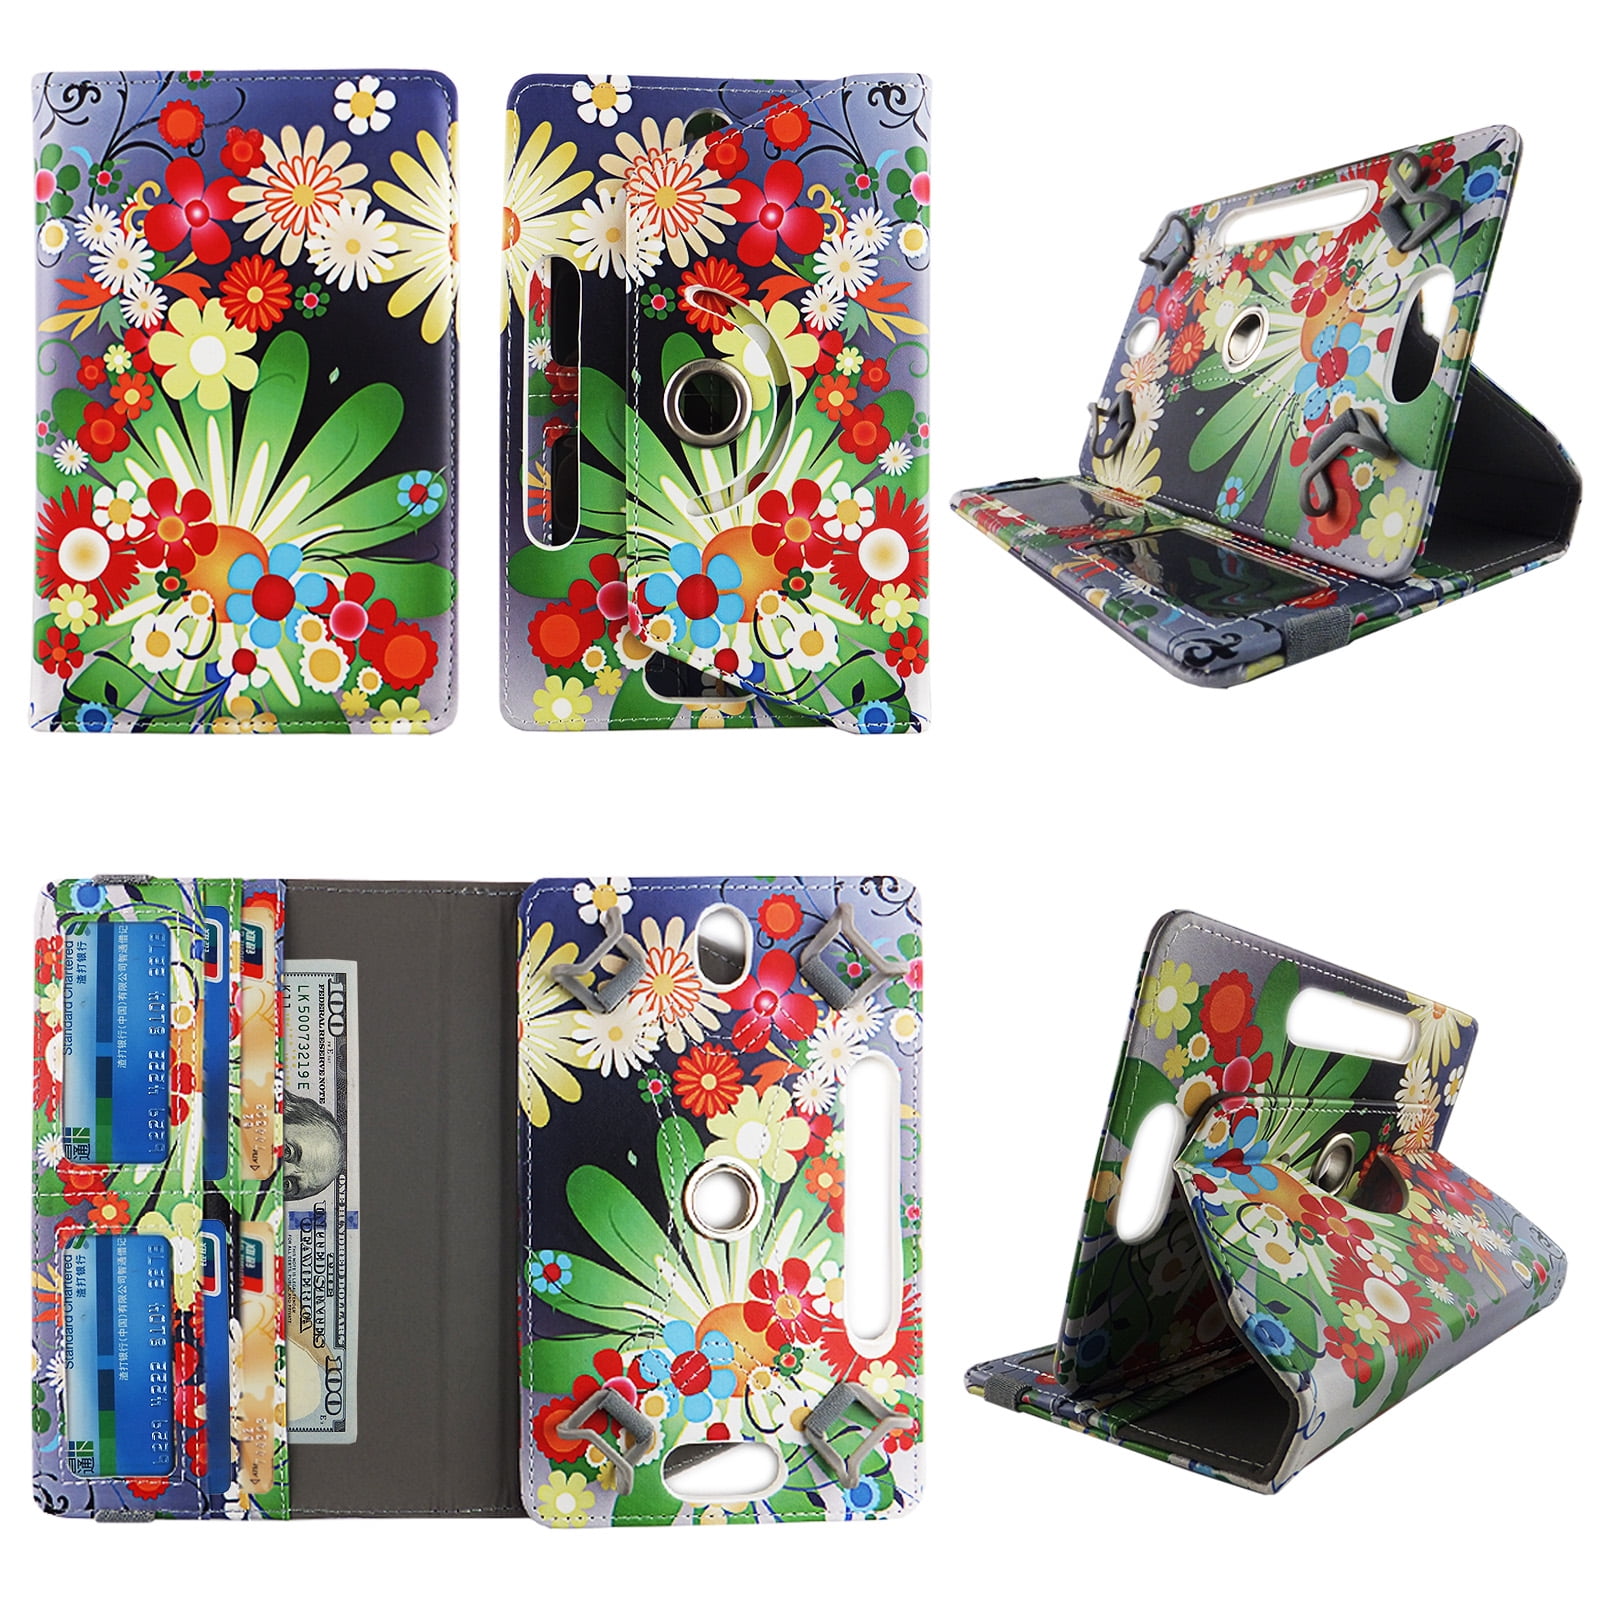 Multi Flower tablet case 10 inch for Acer Iconia 10.1 10